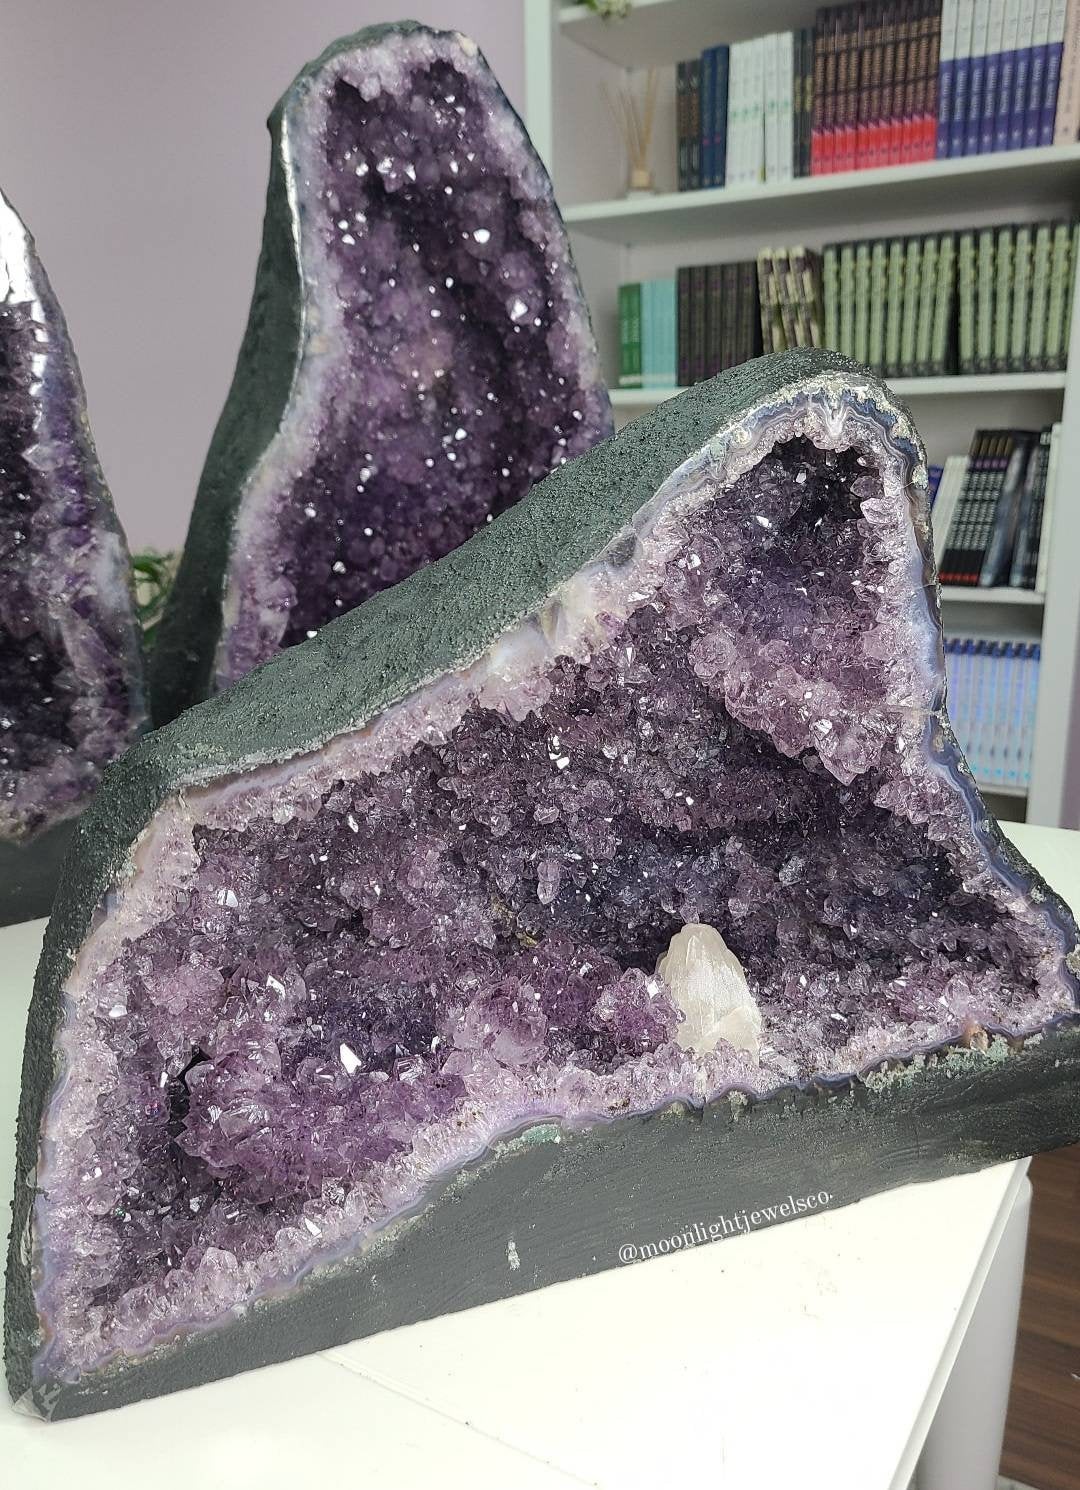 18.75 KG Amethyst Cathedral with Calcite Inclusion, Micro Druzy and Amethyst 